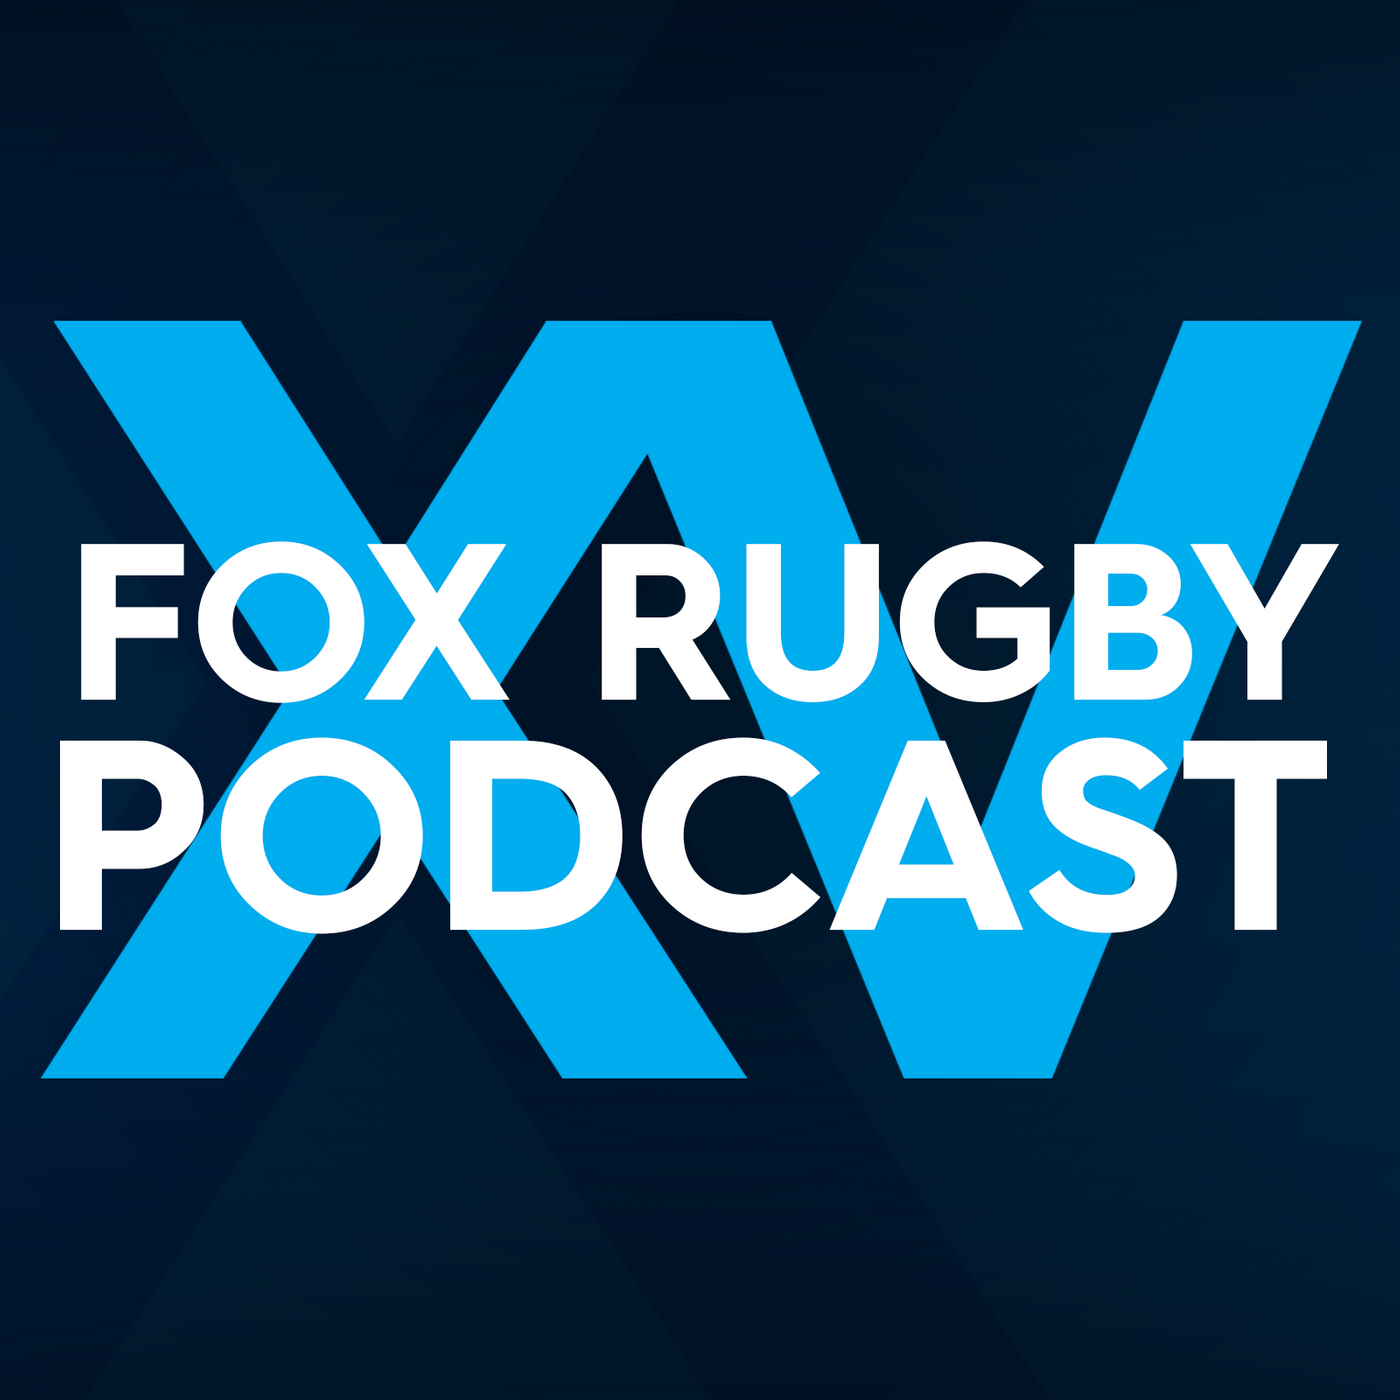 SUPER RUGBY AU FINAL PREVIEW with NIC WHITE and WILL GENIA | Nic White on what it takes to win a final | Brumbies mentality | How to beat the Reds | Will Genia on life in Japan | Reflections of the Super Rugby Final in 2011 | Parallels between squads